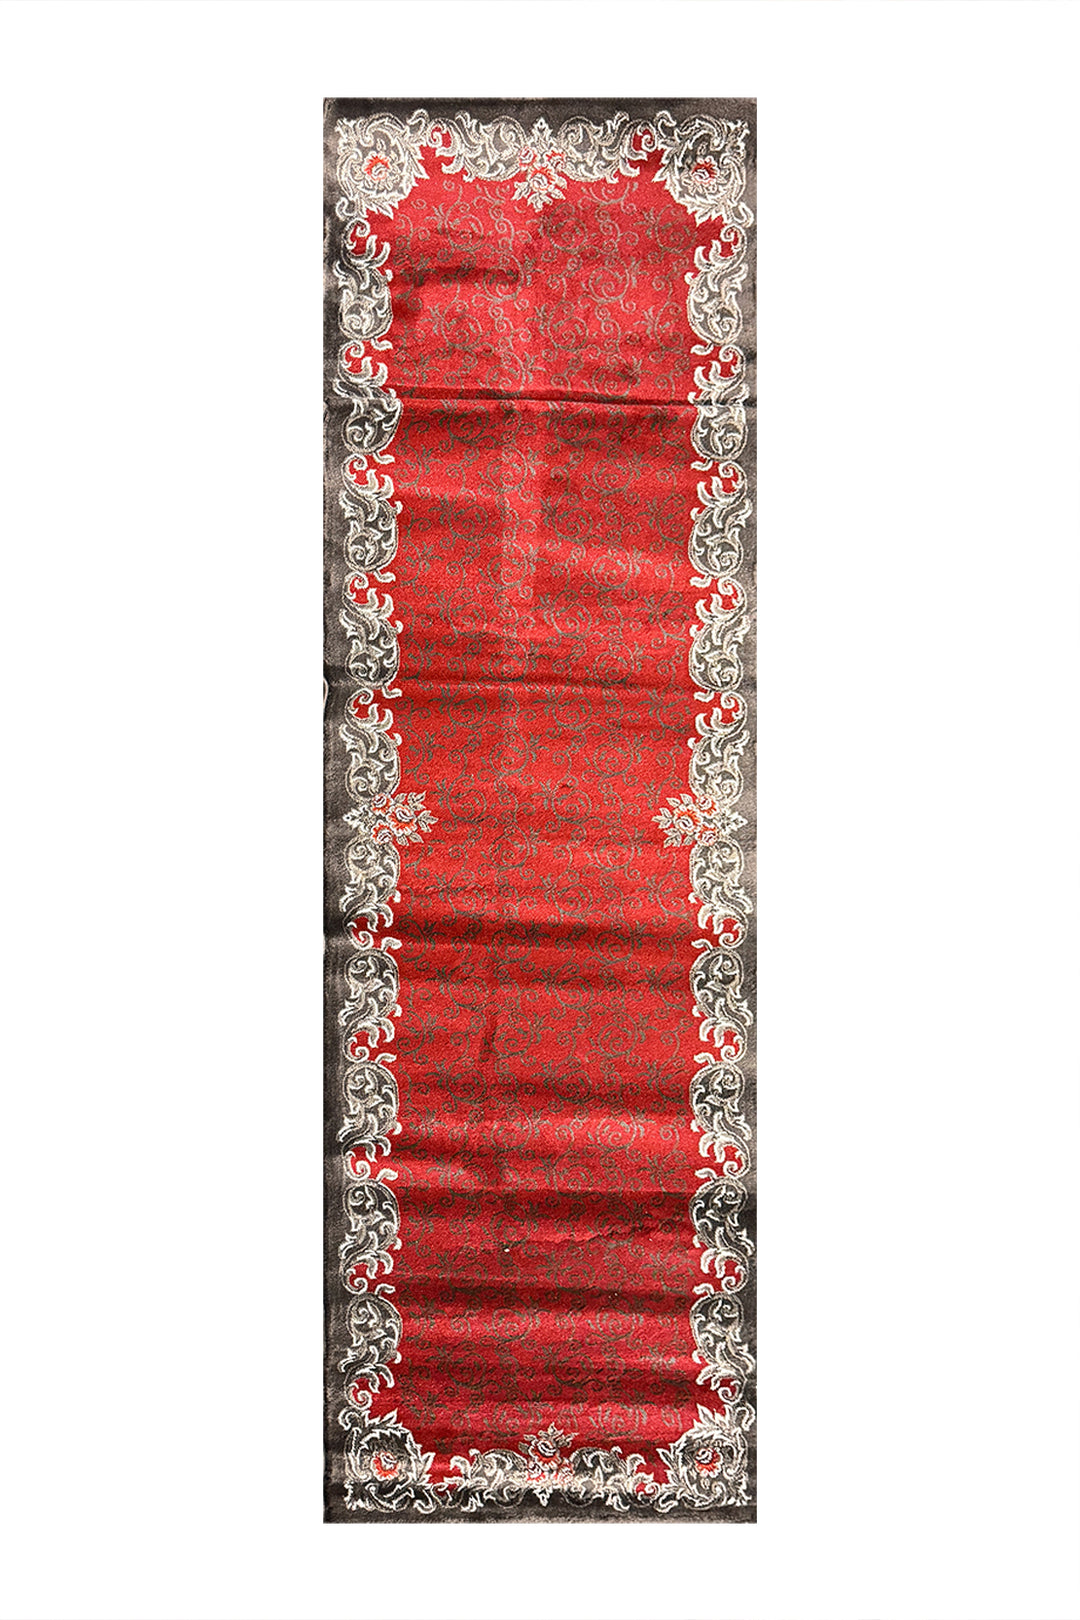 Turkish Modern Festival WD Rug - Red- 3.2 x 9.8 FT - Superior Comfort, Modern & runners Style Accent Rugs